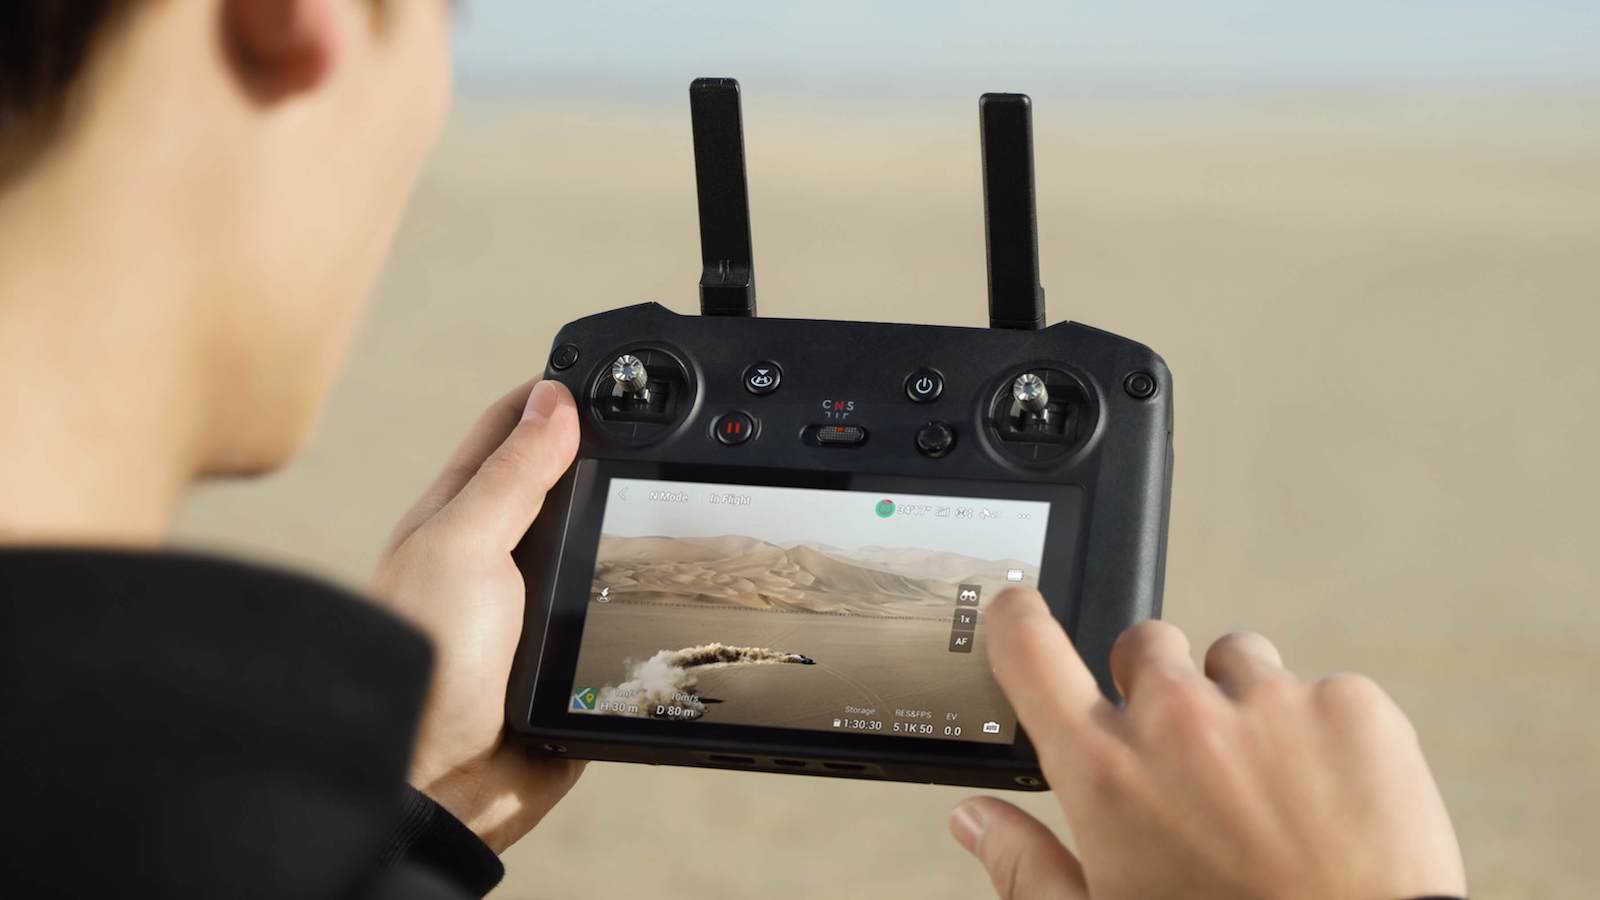 DJI RC Pro drone remote controller has O3+ video transmission technology & 4G communication